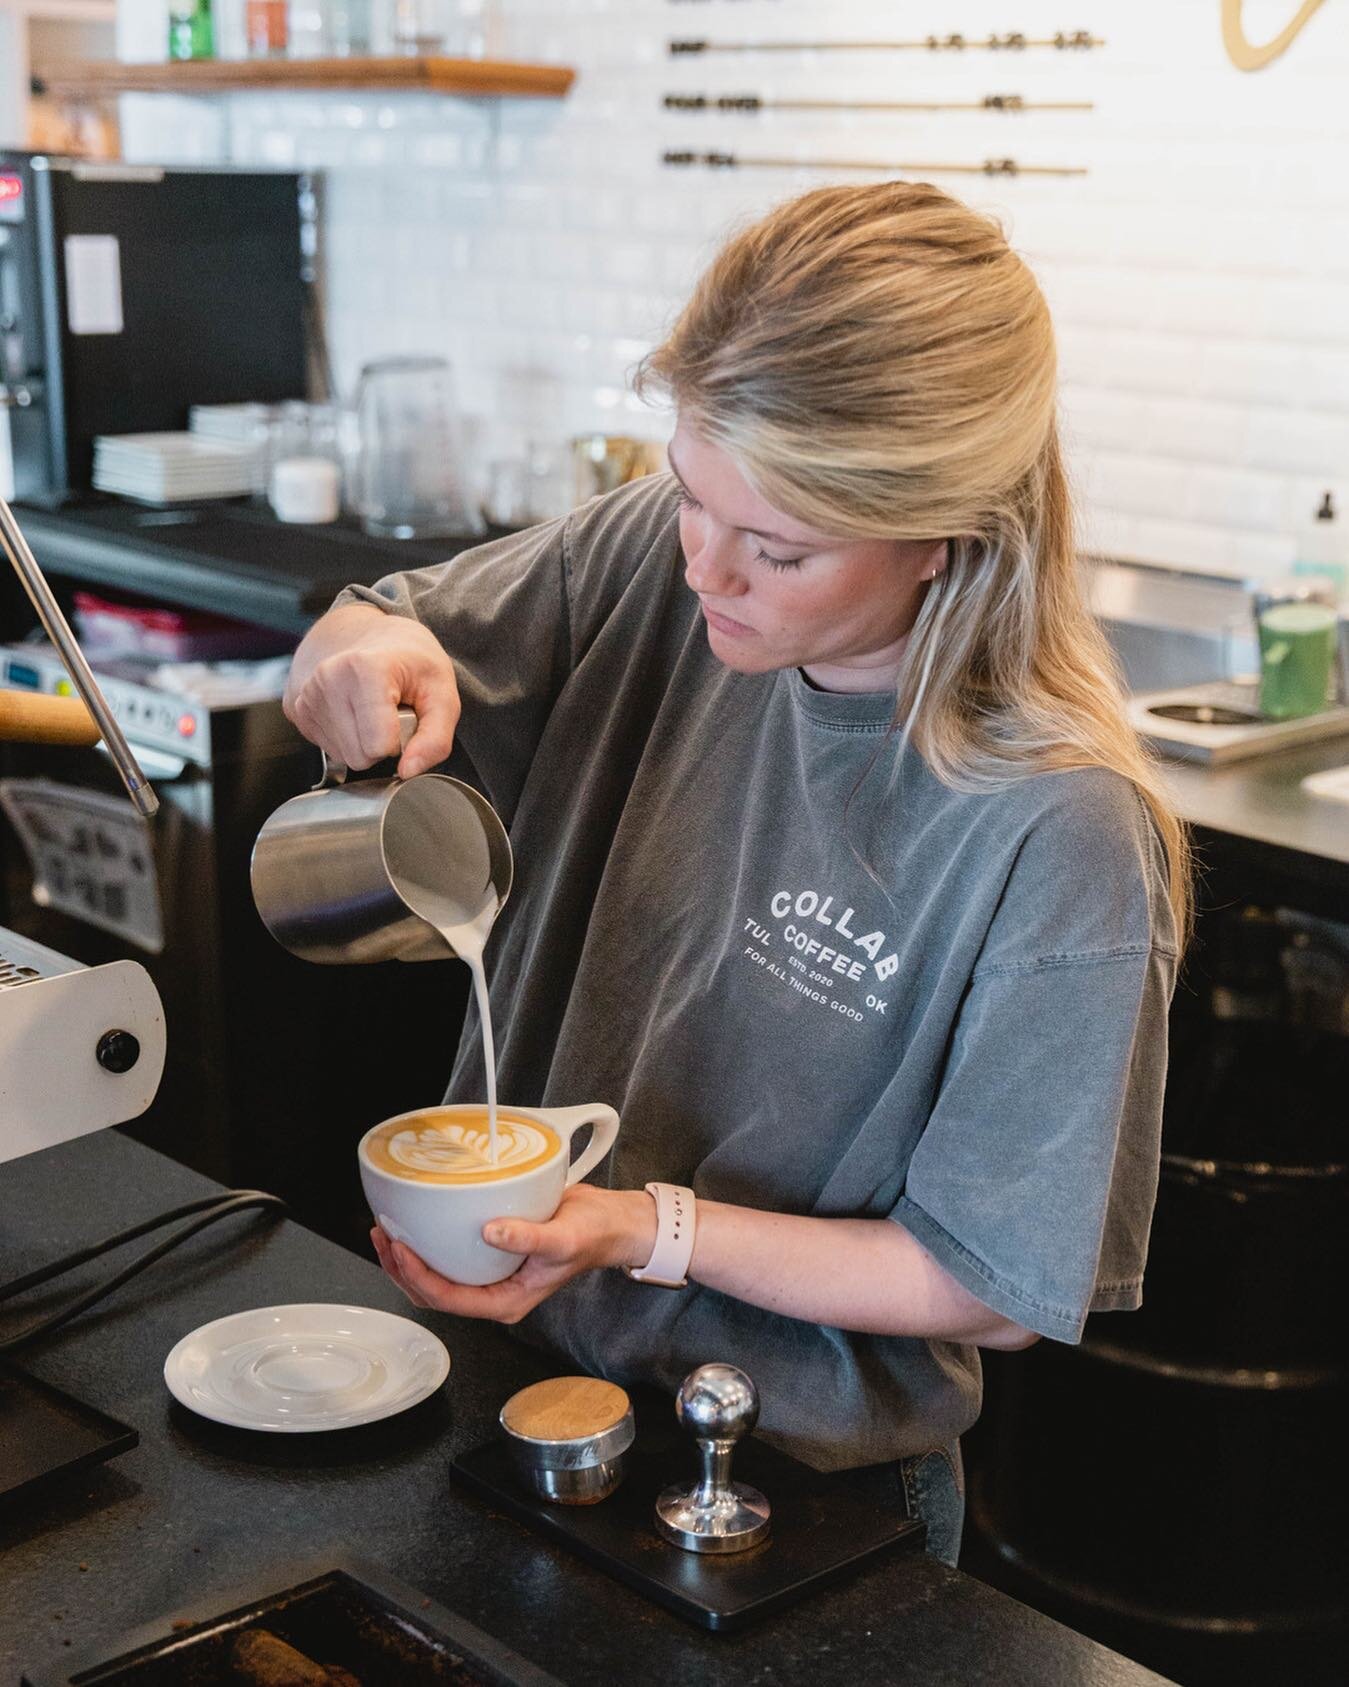 Wishing a HUGE Happy Birthday to our baker &amp; barista, Kirsten!! 🥳 Give her some birthday love in the comments below!👇🏼